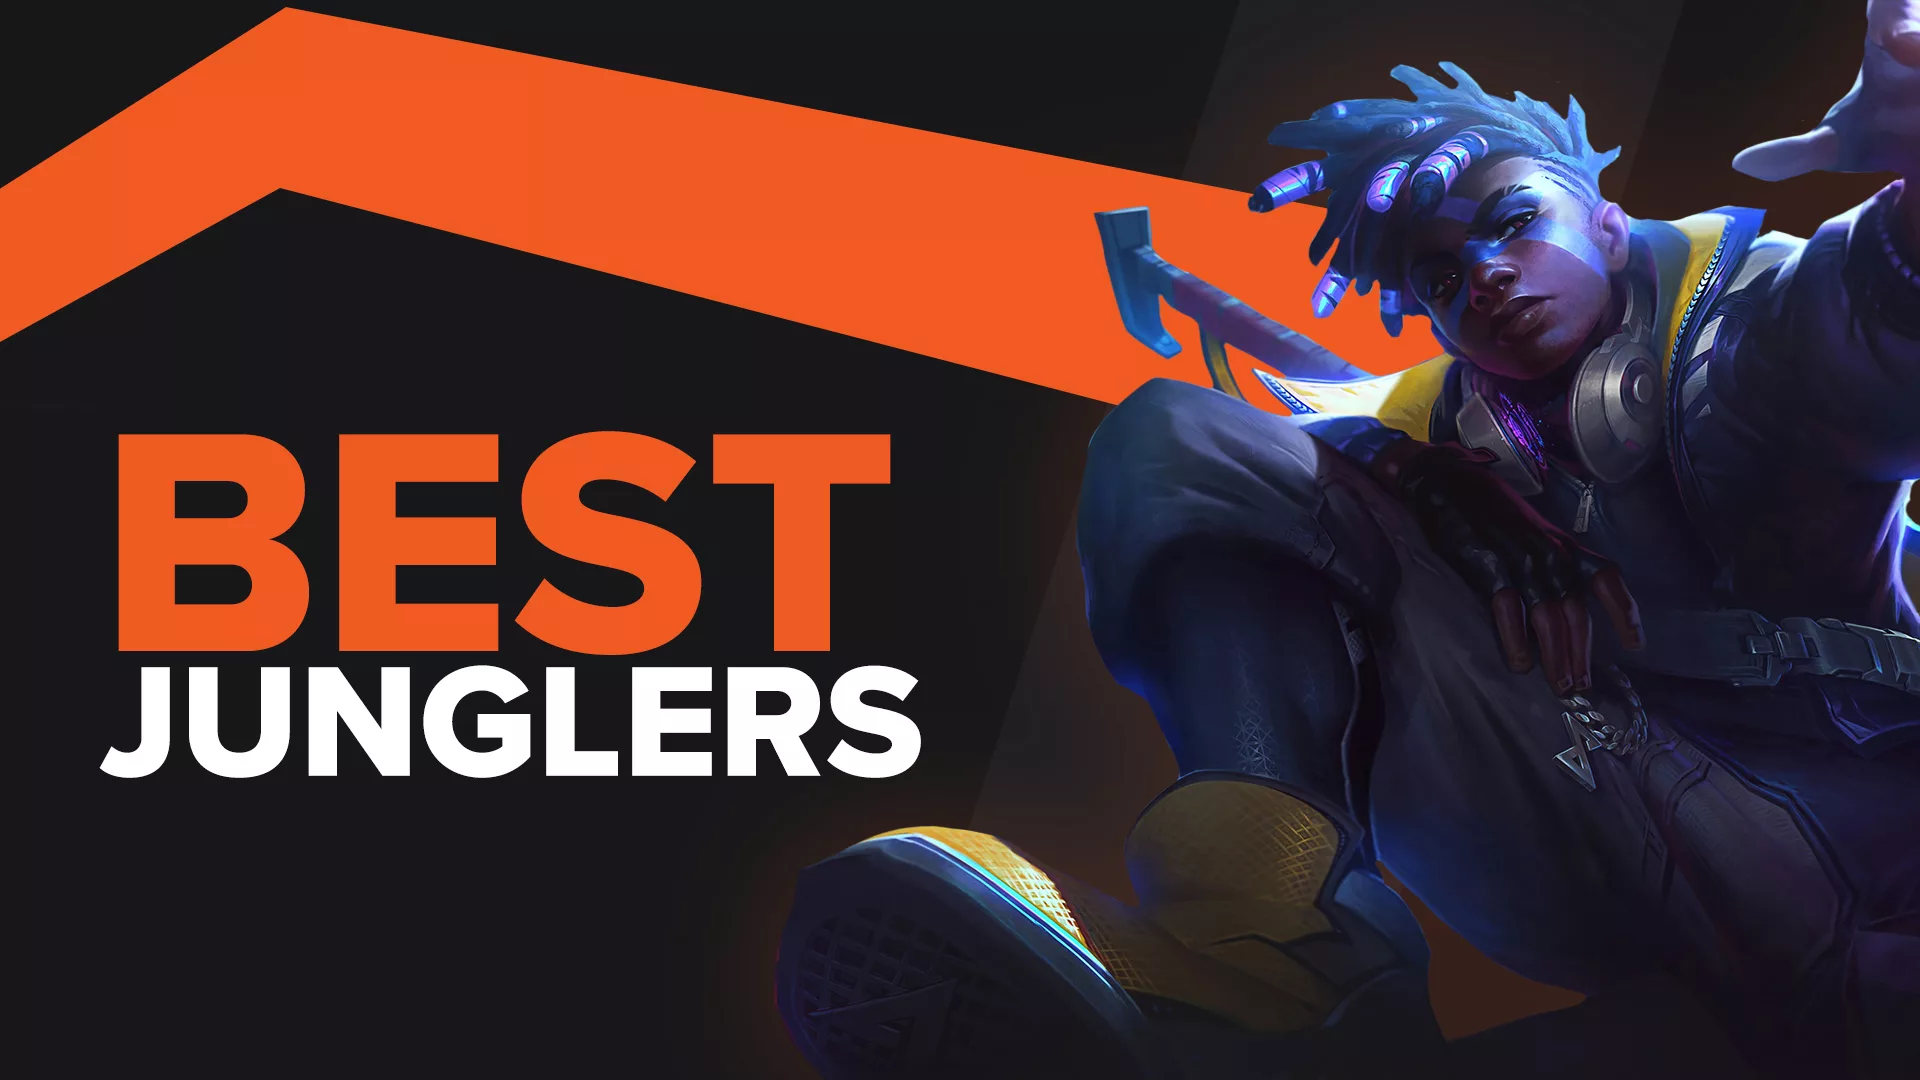 5 Best Jungler Champions to Grind With in LoL